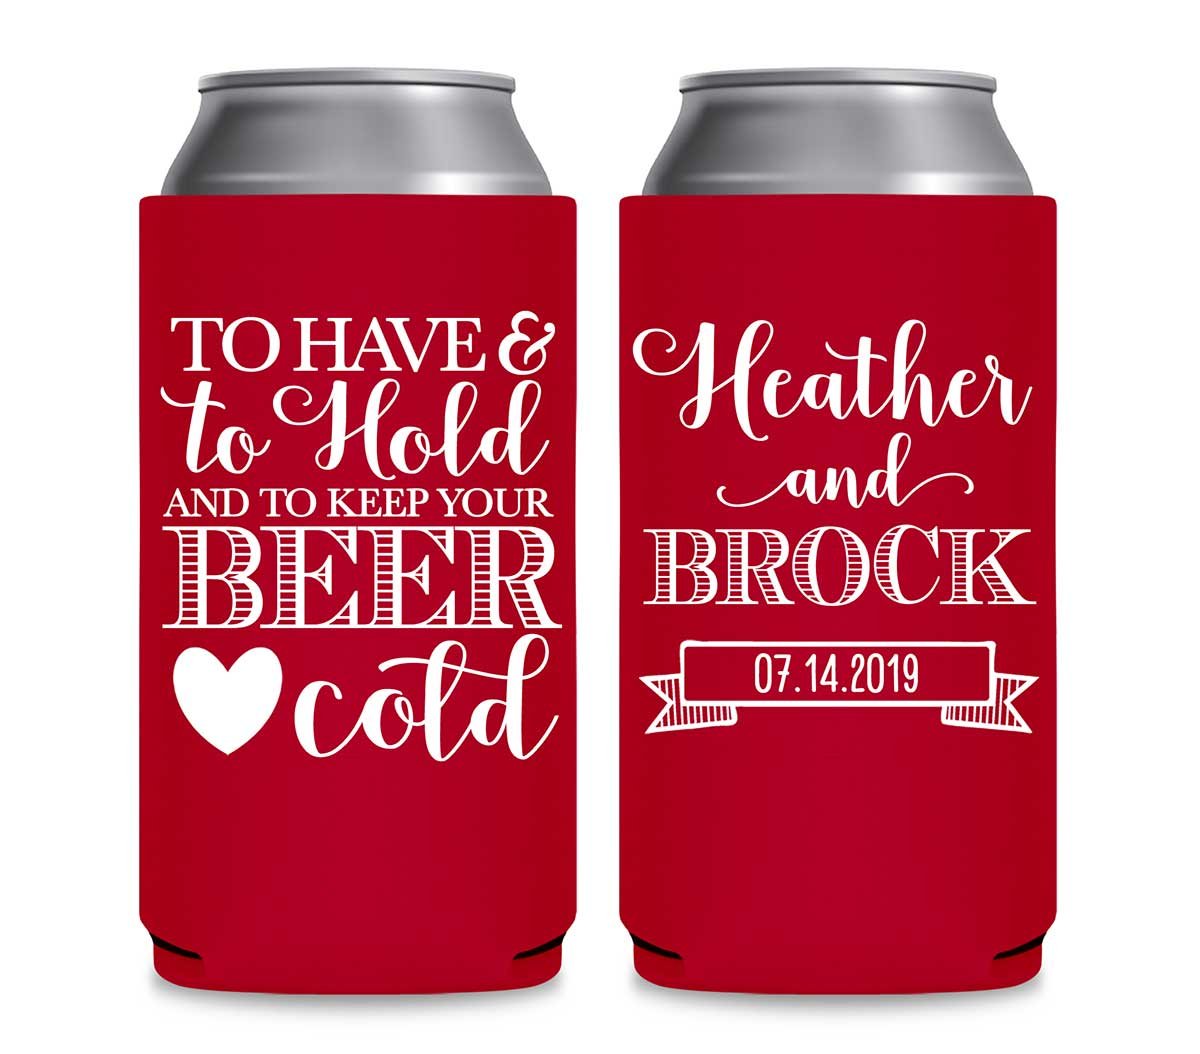 https://www.thatweddingshop.com/wp-content/uploads/2019/12/To-Have-And-To-Hold-Keep-Your-Beer-Cold-1A-Collapsible-Foam-12oz-Slim-Can-Koozies-Personalized-Wedding-Favors.jpg